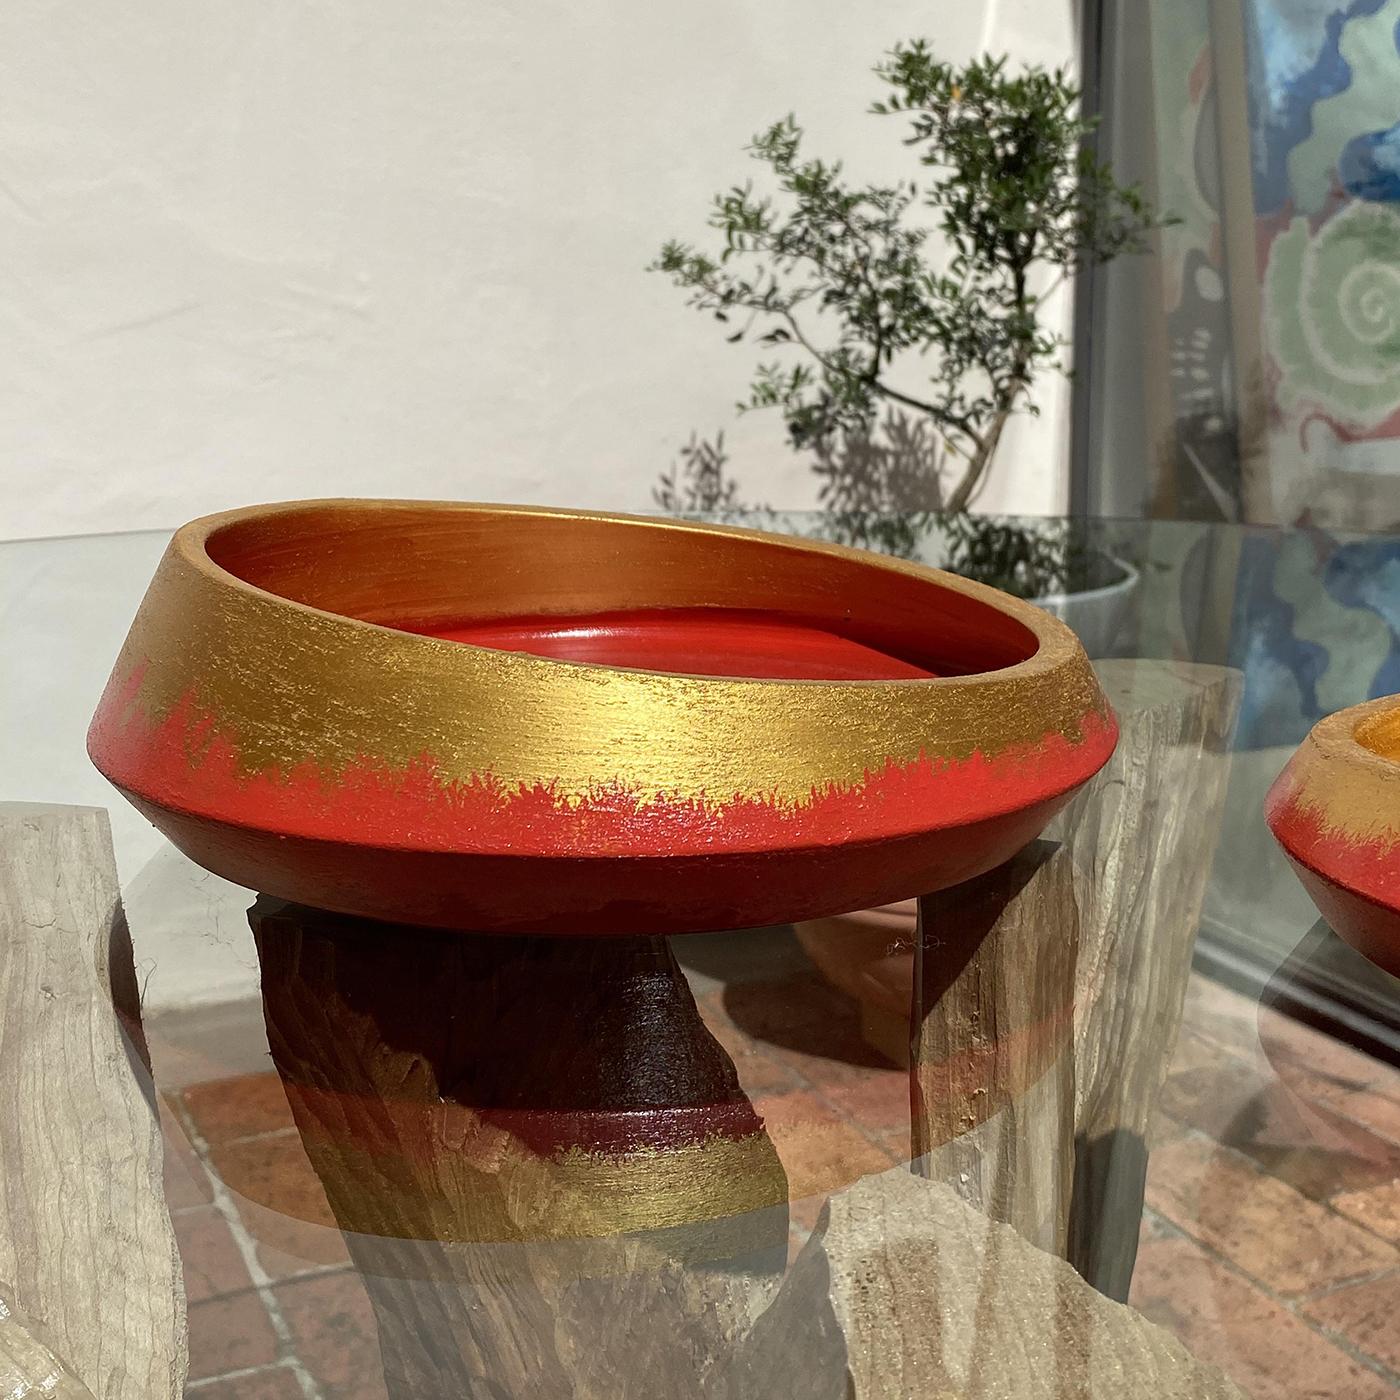 This set of two hand turned vases are crafted from white biscuit terracotta. Hand painted for a wonderfully rustic allure, their matching designs combine a fiery red base with luxurious gold edging. The Calafuria Sei 2 Vases by Mascia Meccani adds